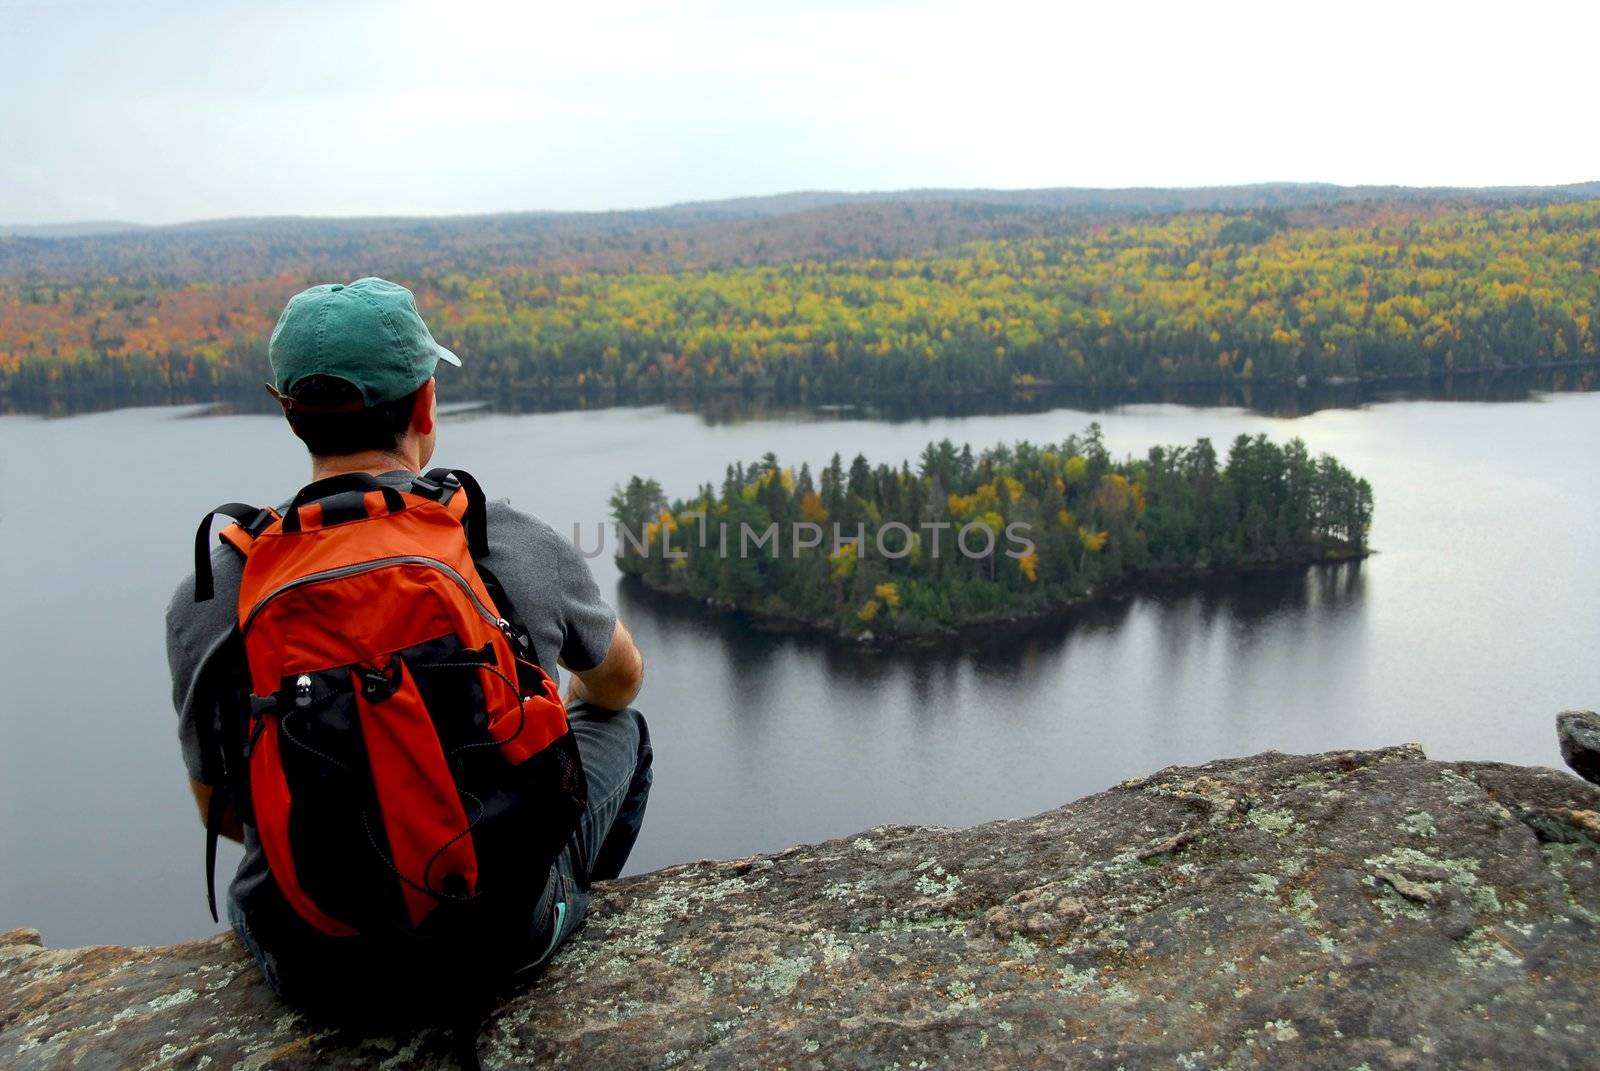 A hiker sitting on a cliff edge enjoying scenic view